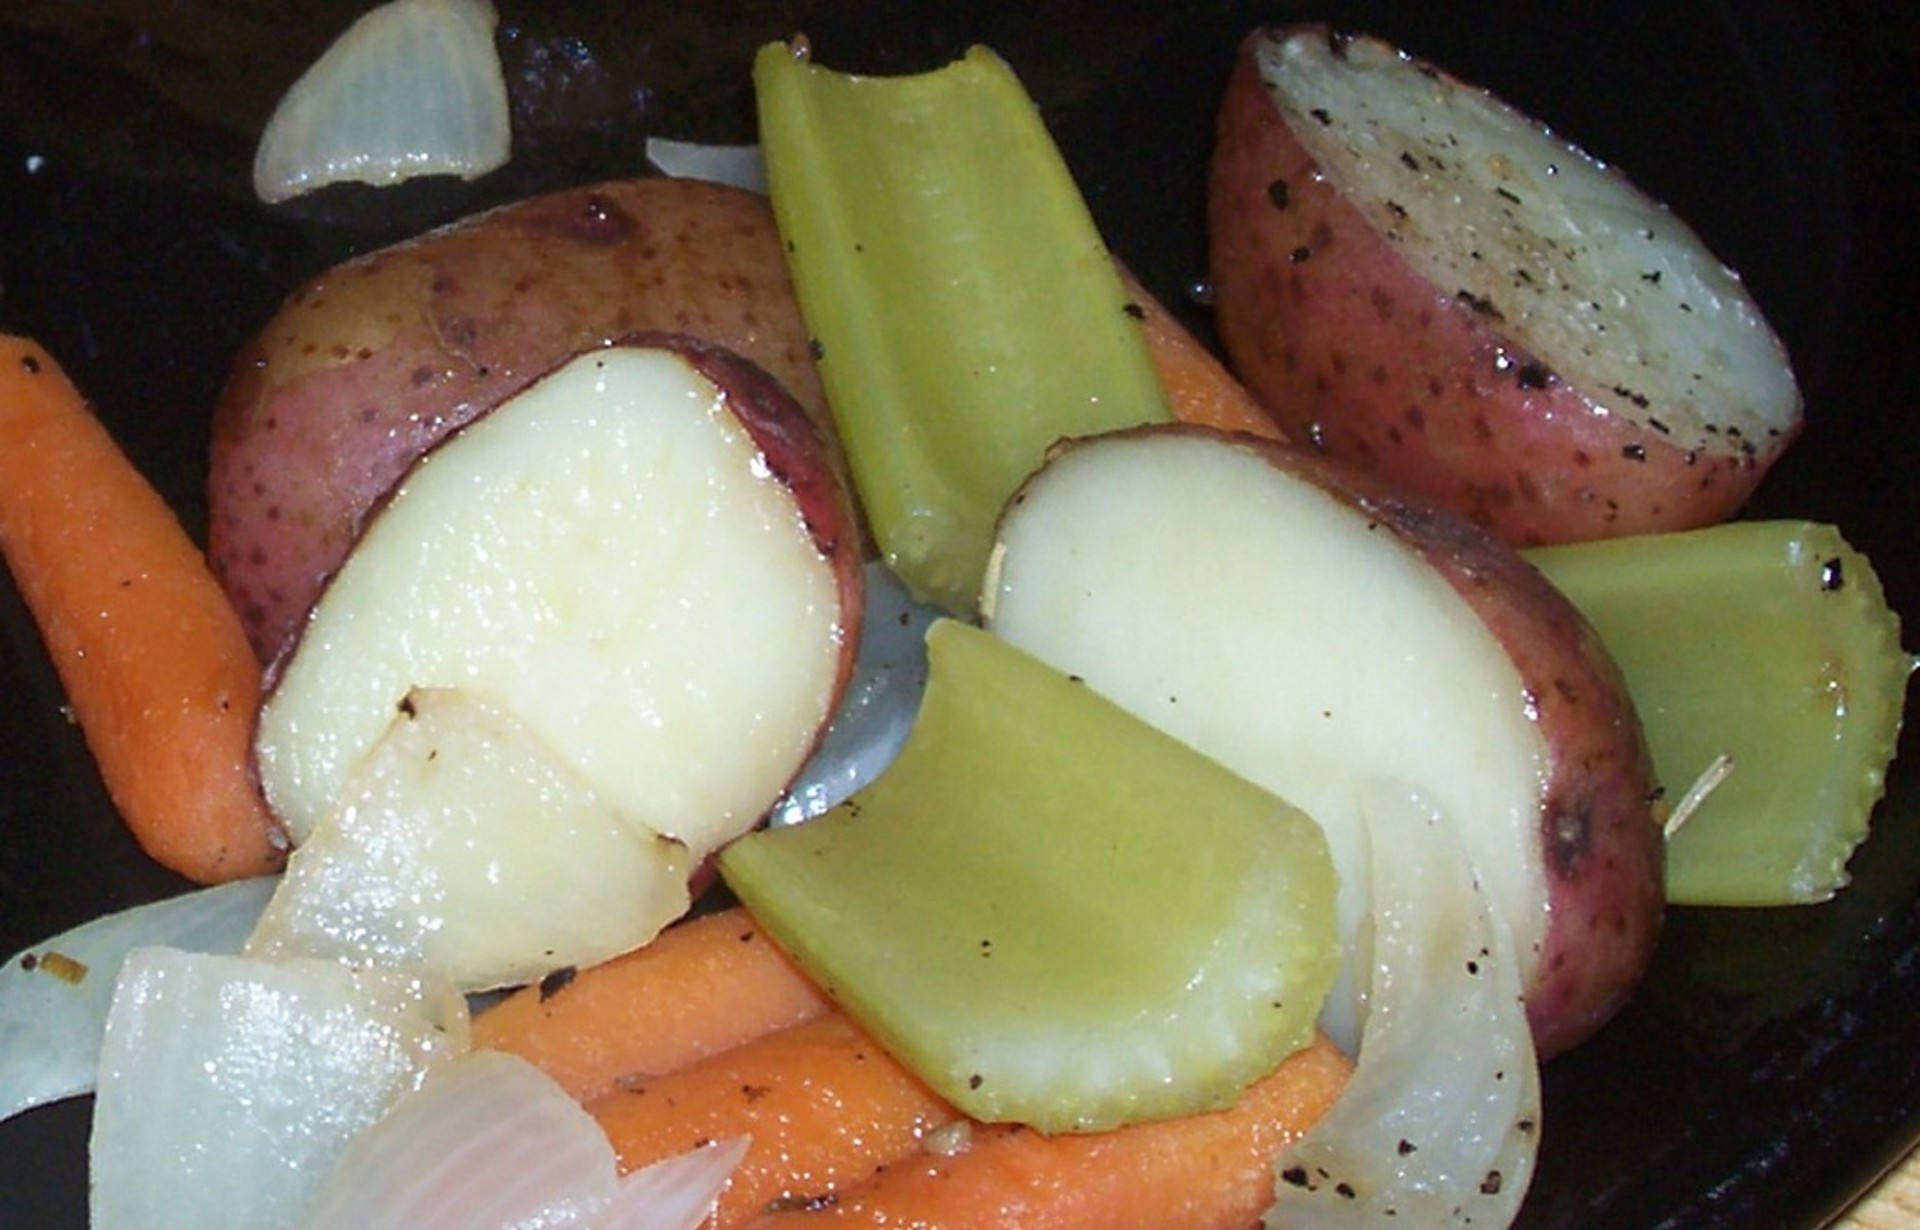 Yummy Roasted Vegetables!